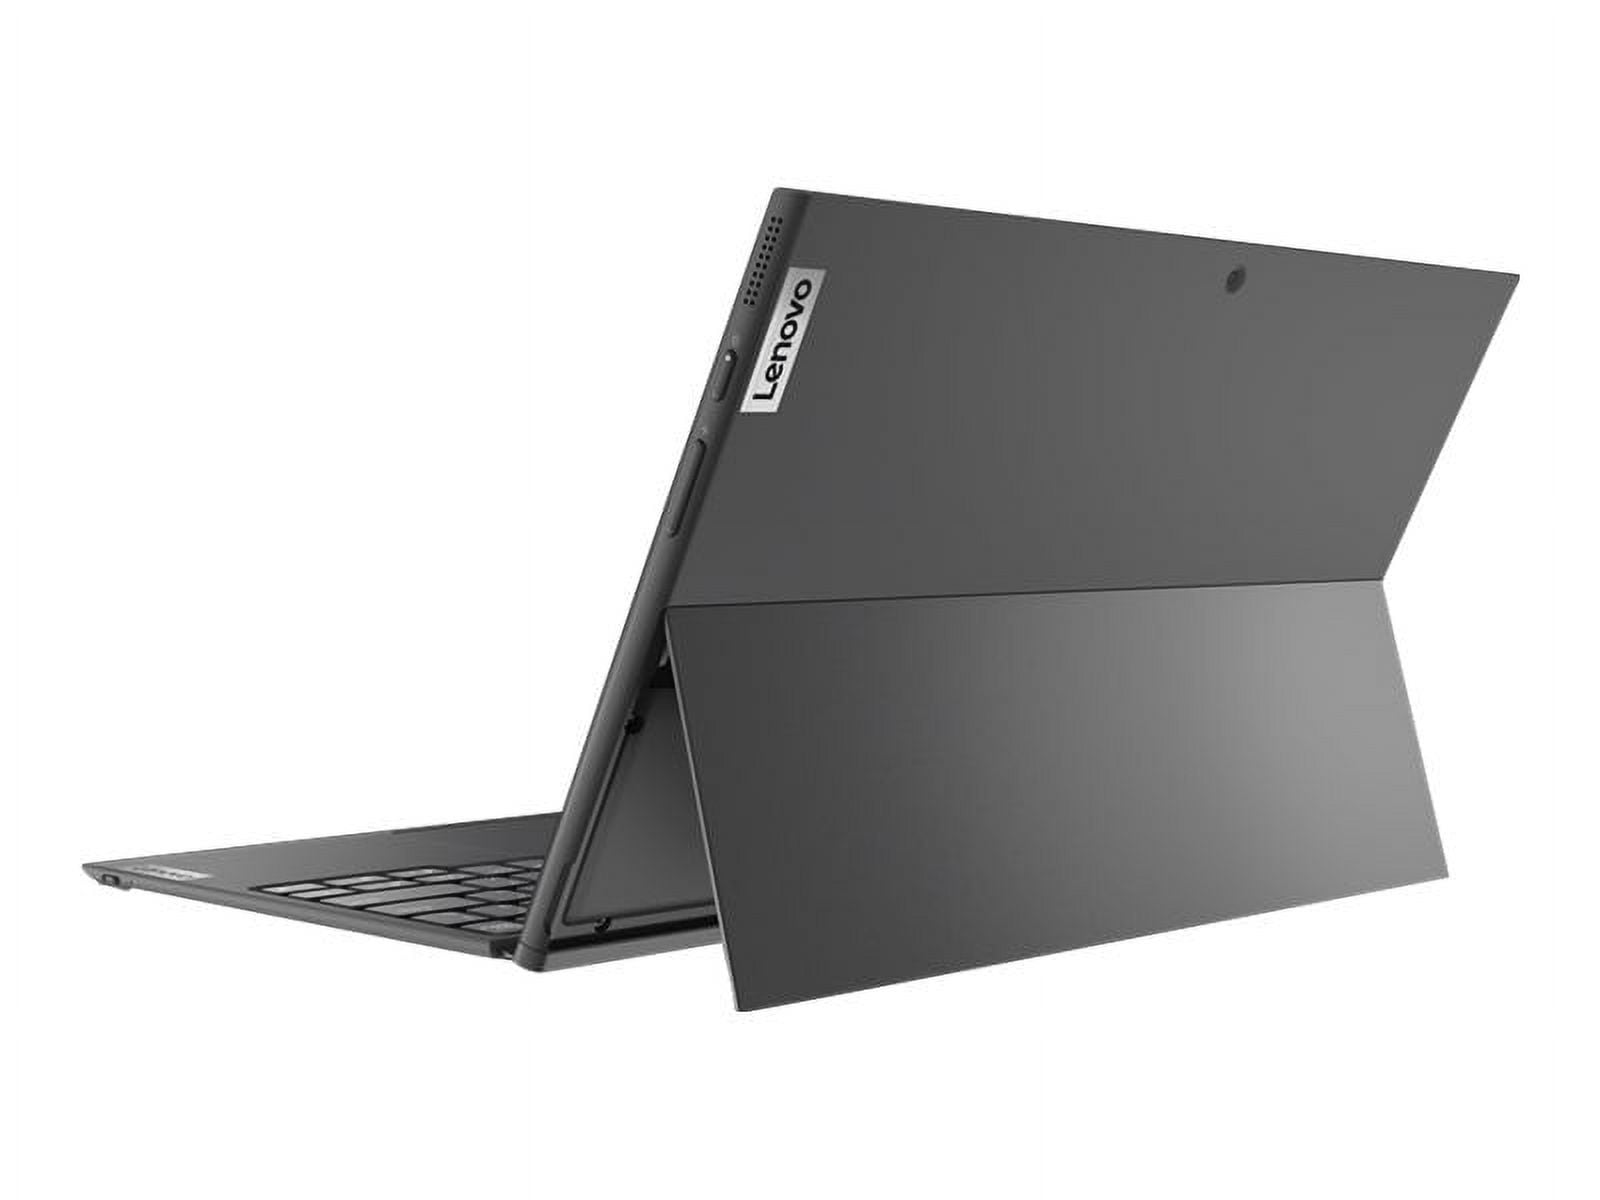 IdeaPad detachable with Home 11 - - - 600 mode 10IGL5 Win in Duet 1.1 Graphics UHD Intel - N4020 Lenovo GHz - / Celeron - S Tablet 3 82AT - keyboard